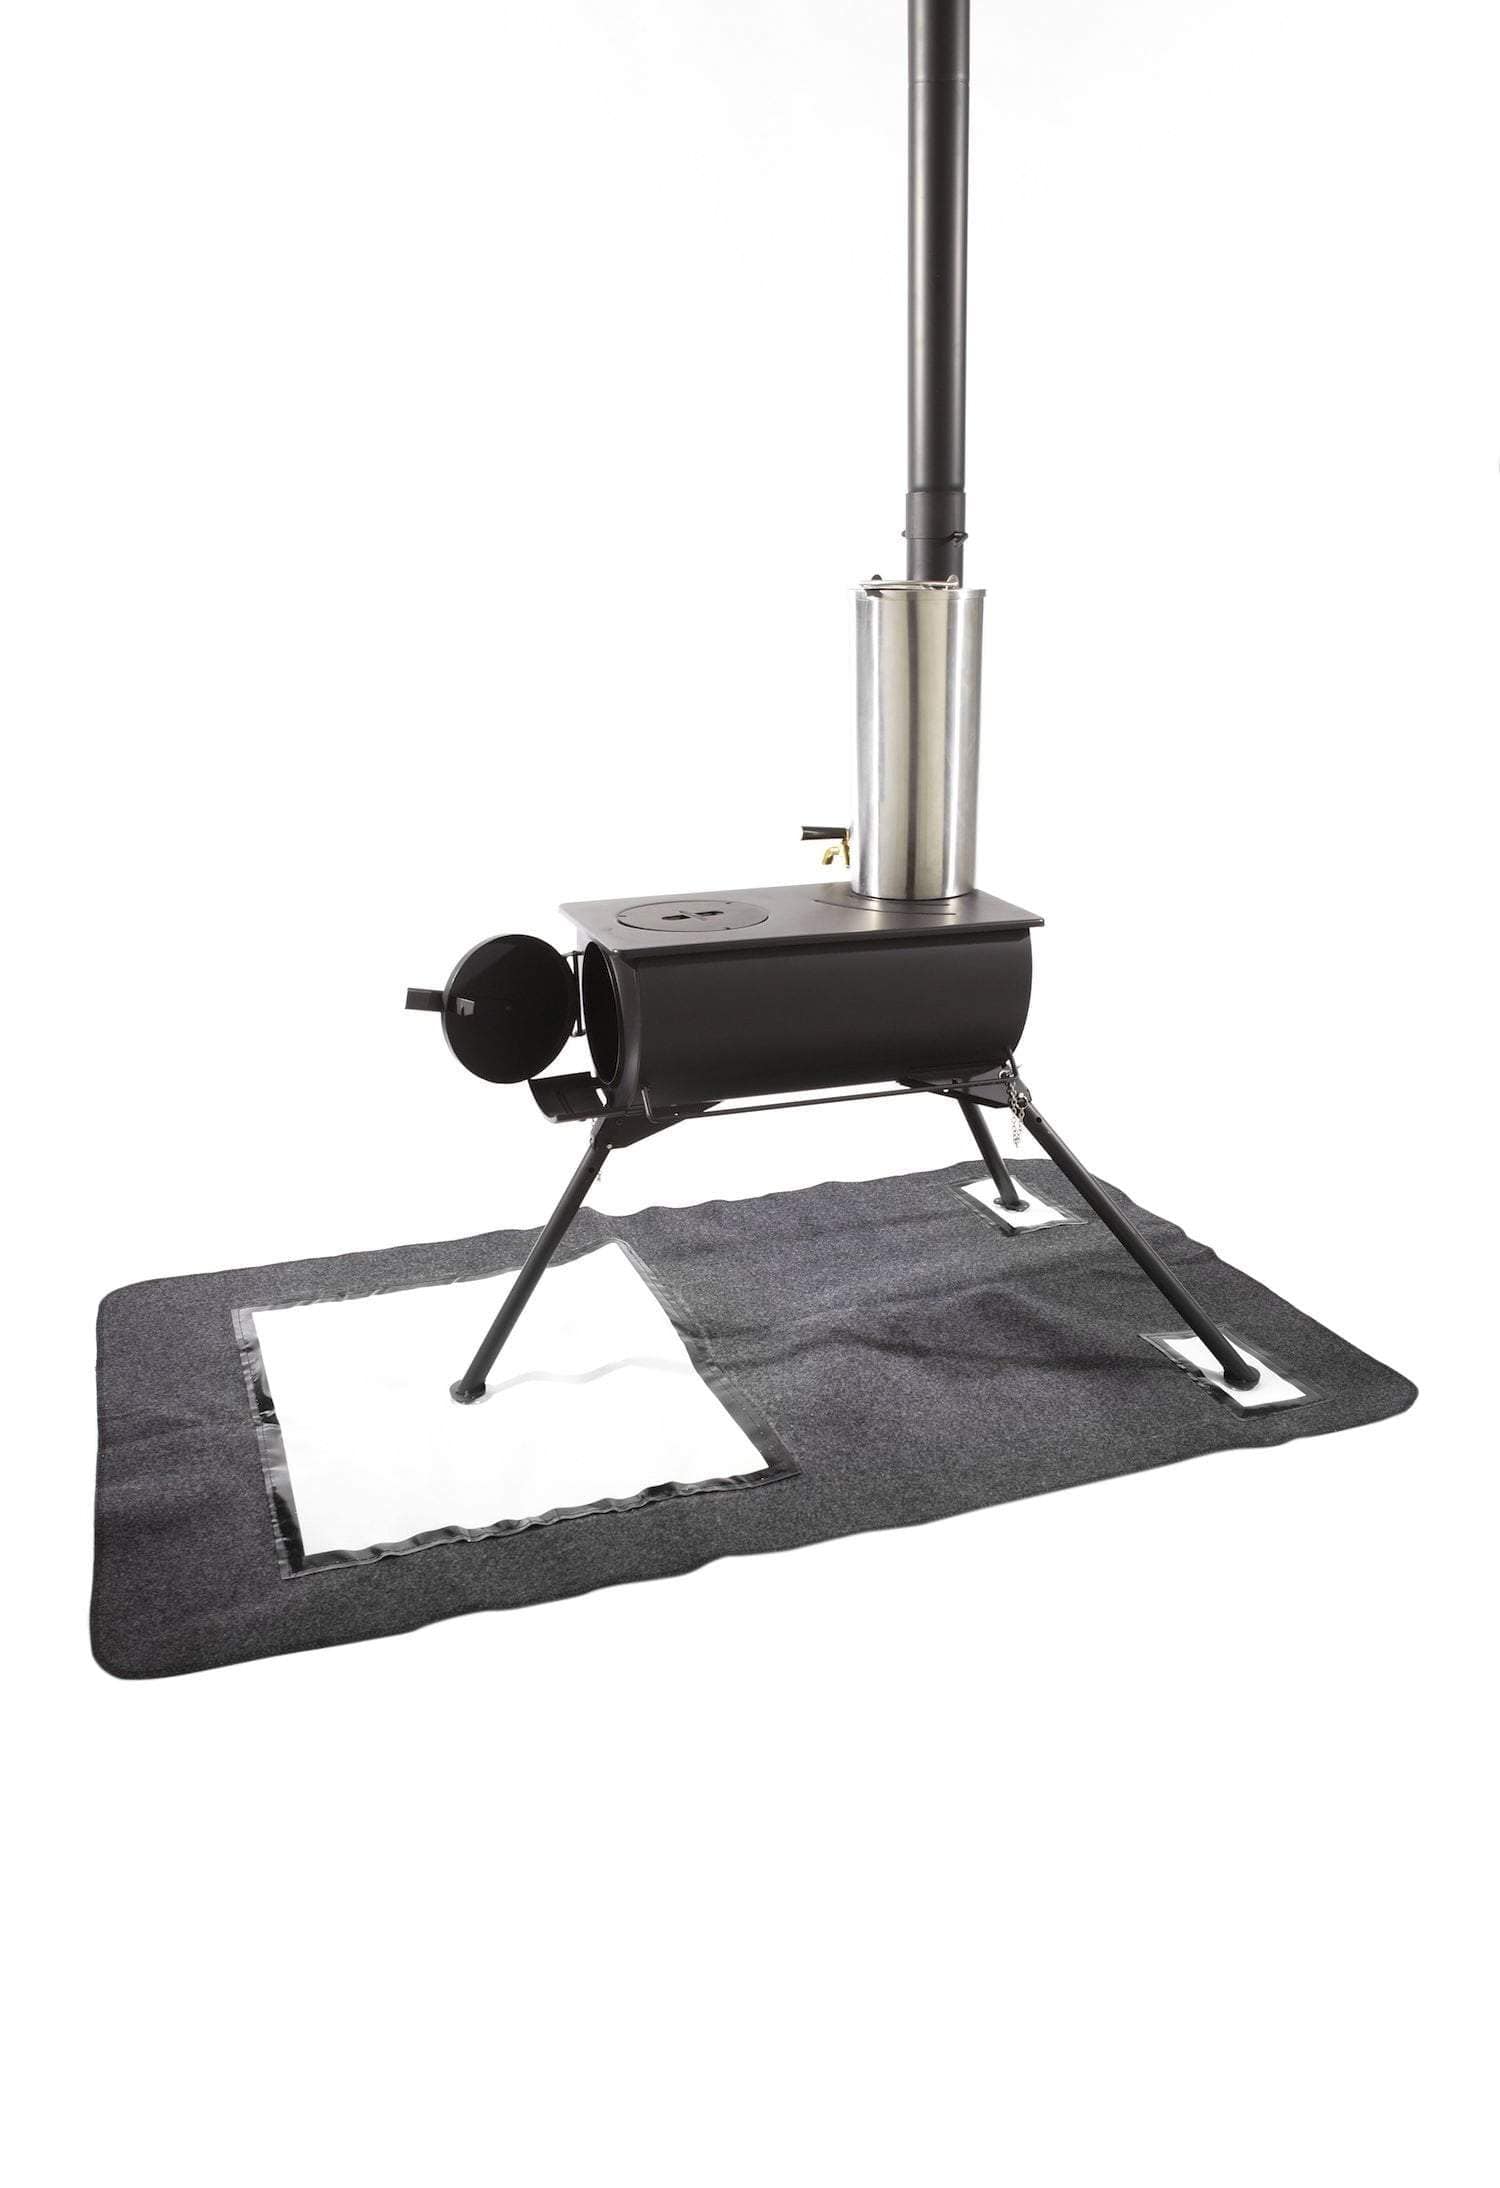 Outbacker® Portable Wood Burning Stove